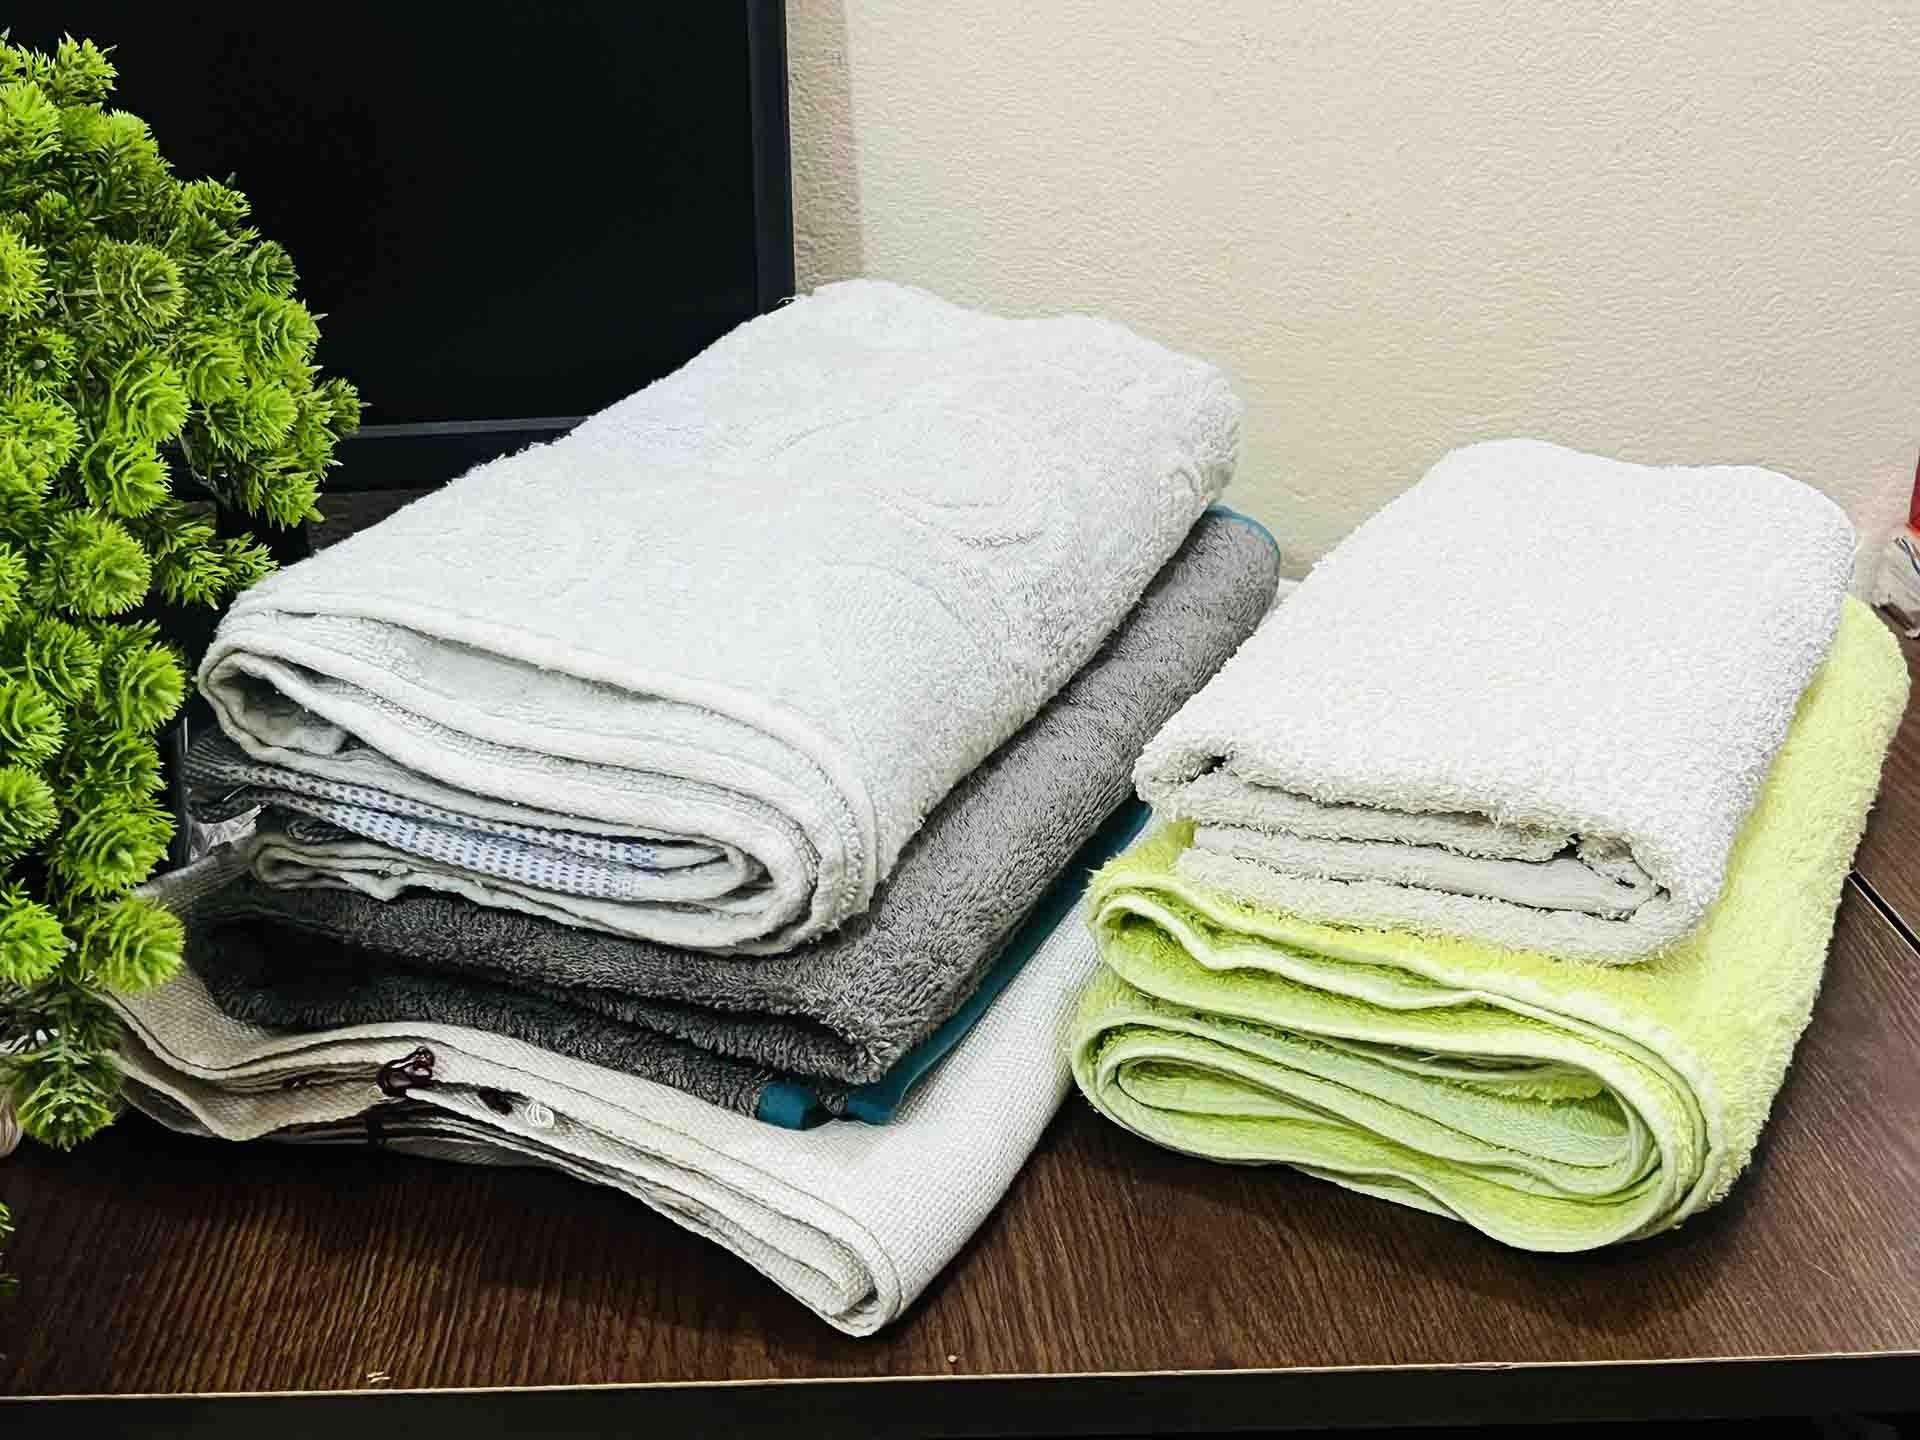 How To Wash New Towels In Front Loader?